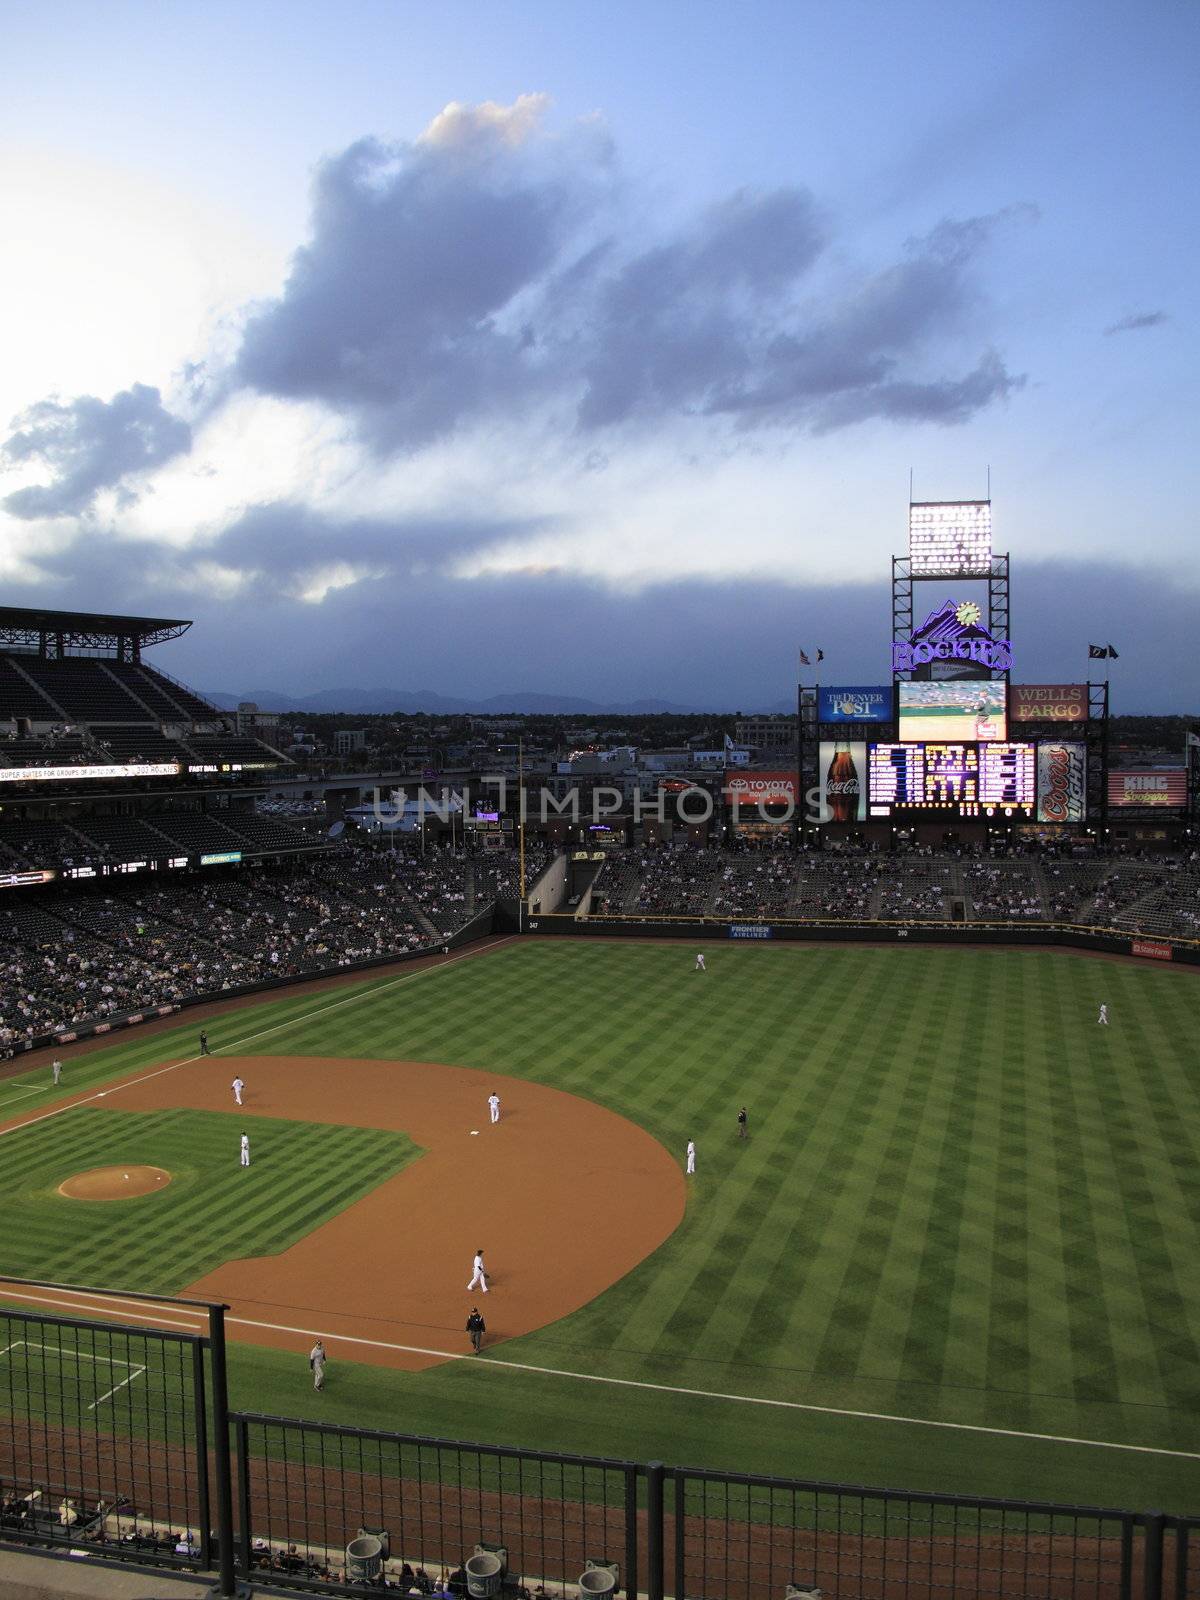 Home field of Colorado Rockies, located in downtown Denver